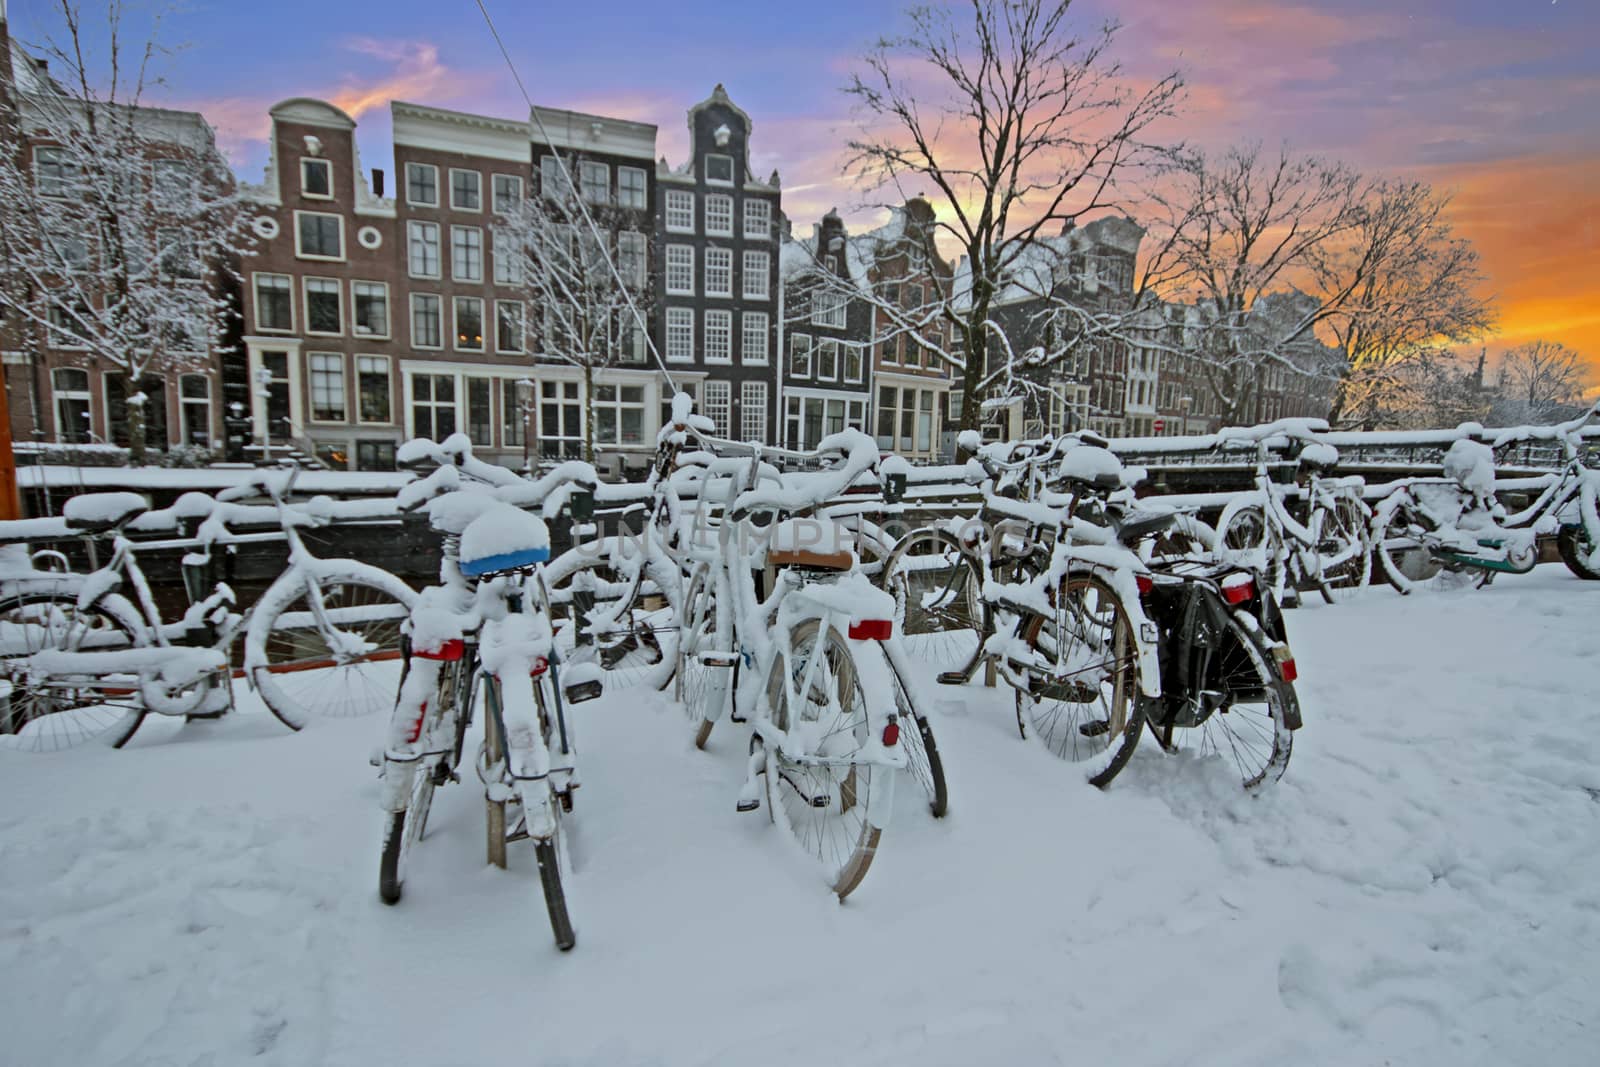 City scenic from snowy Amsterdam in the Netherlands at sunset by devy